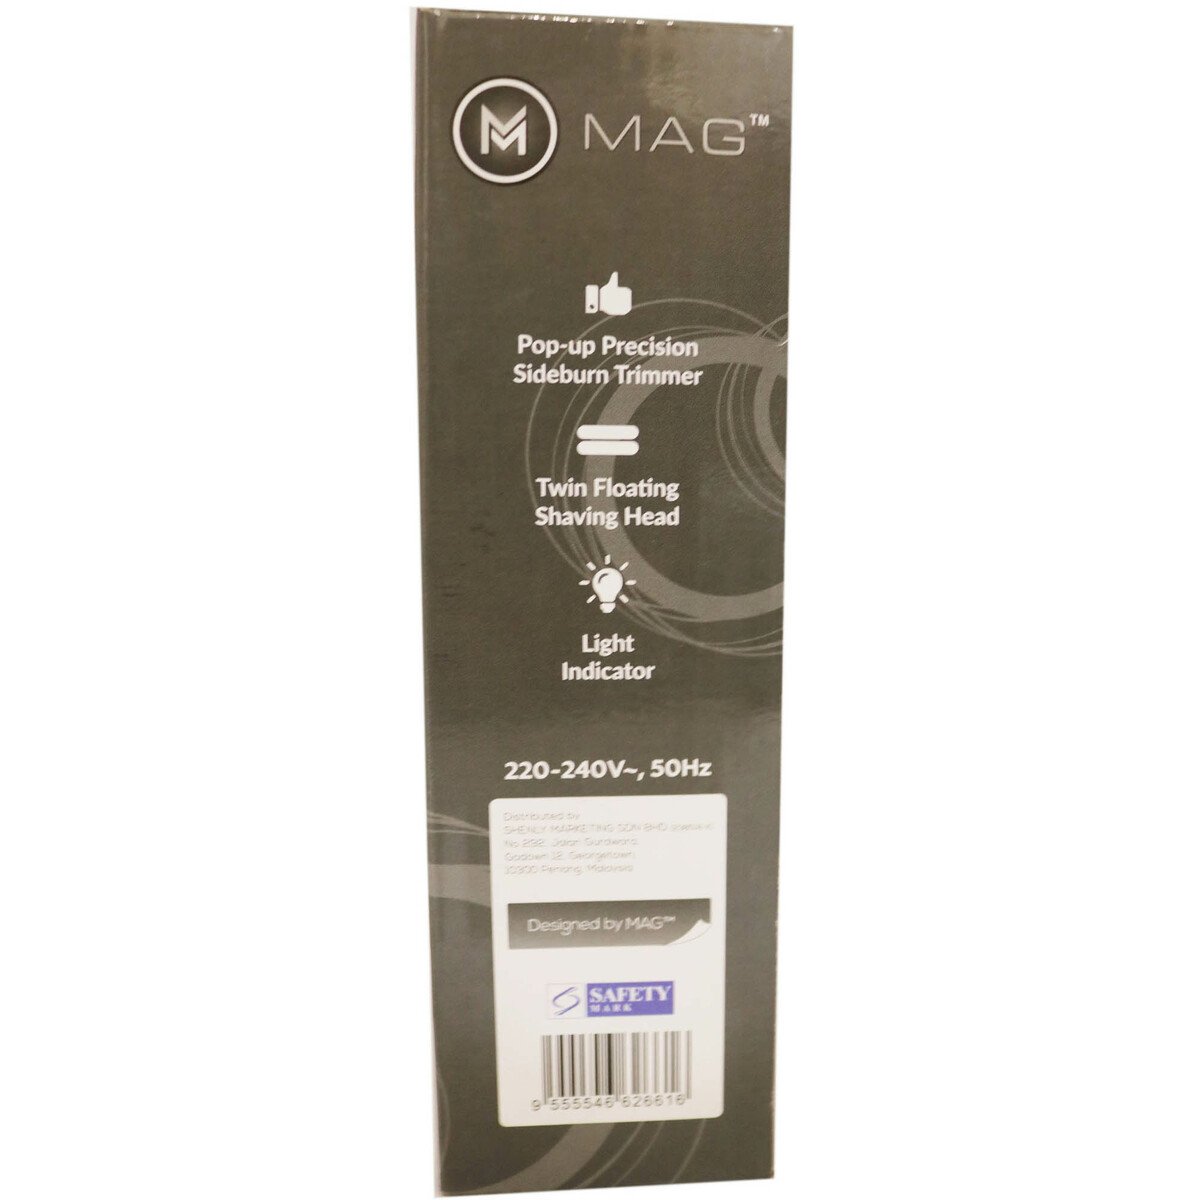 Mag Rechargeable Shaver MG3580